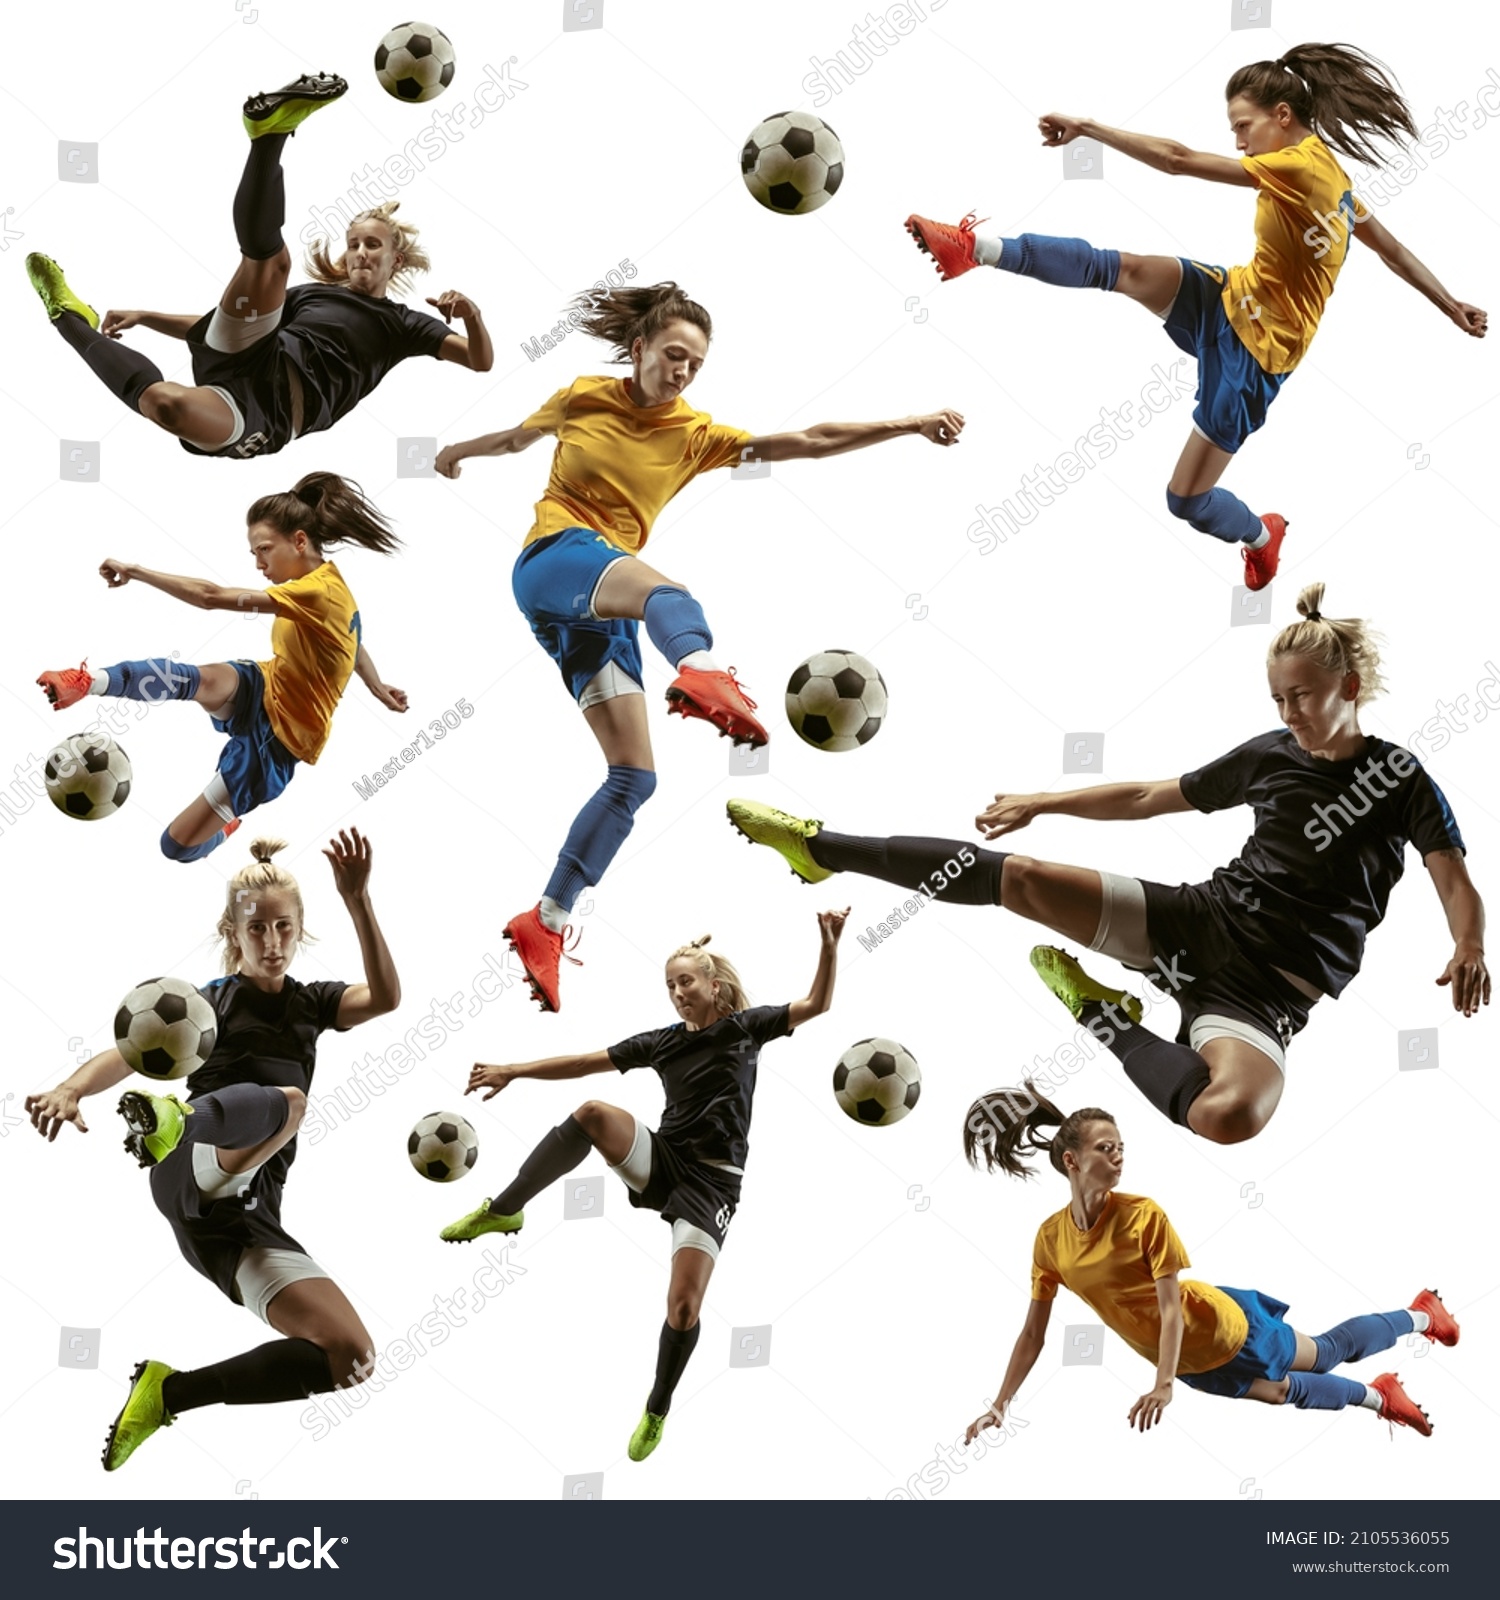 Female football. Set made of professional soccer players with ball in motion, action isolated on white studio background. Attack, defense, fight, kick. Group of girls in football kits. Square #2105536055